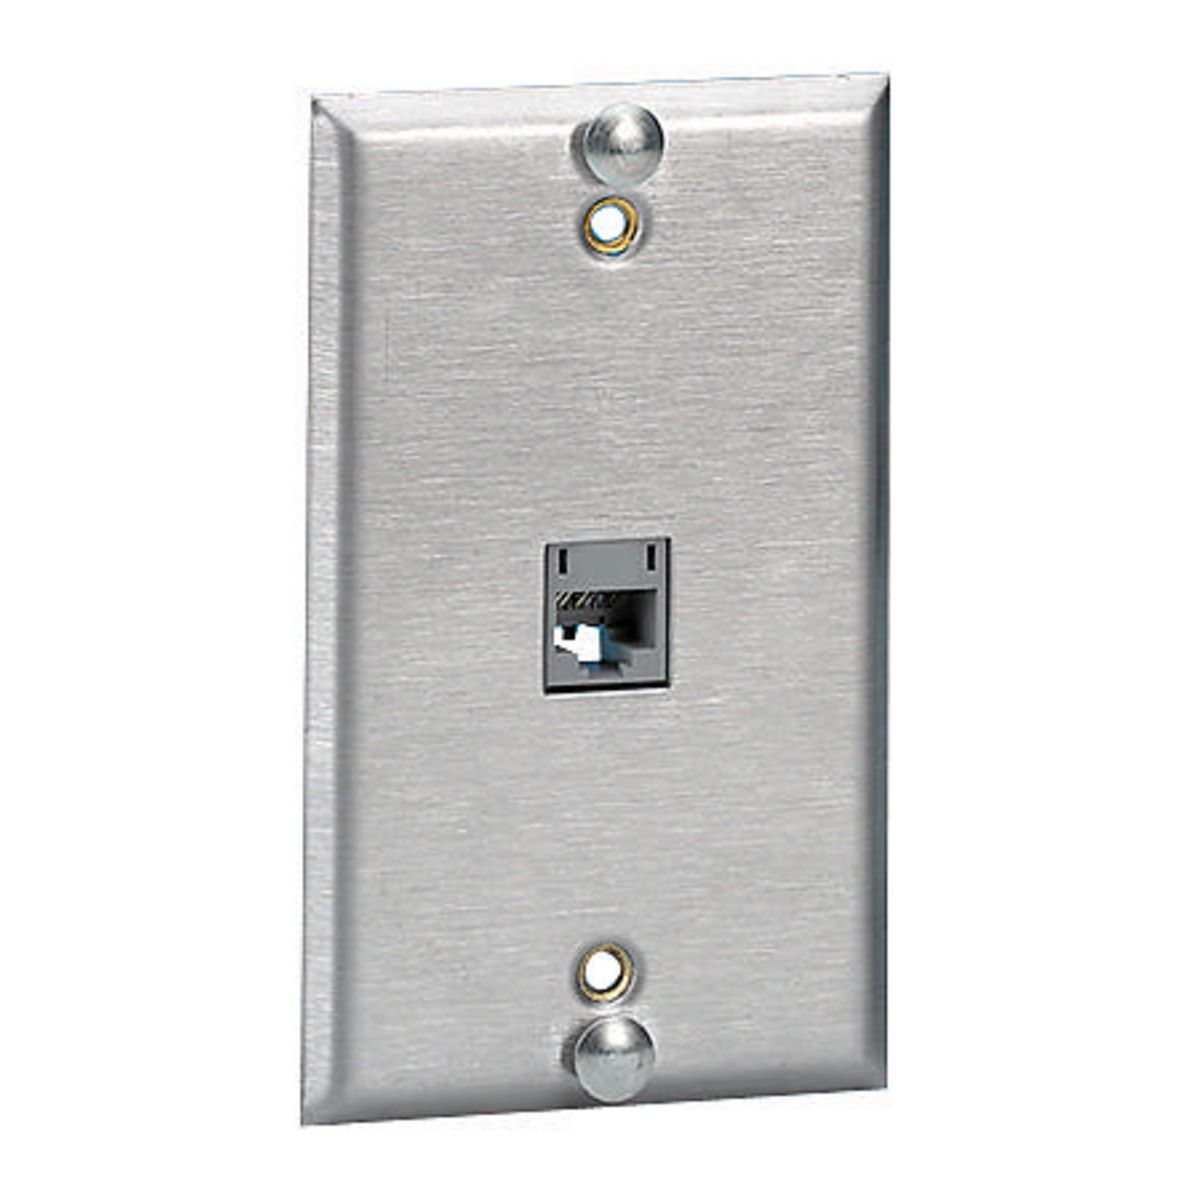 Hubbell Premise Wiring Products, Copper Products, Wallphone Plate, USOC,1-Gang, 1-Port, Flush, Stainless Steel